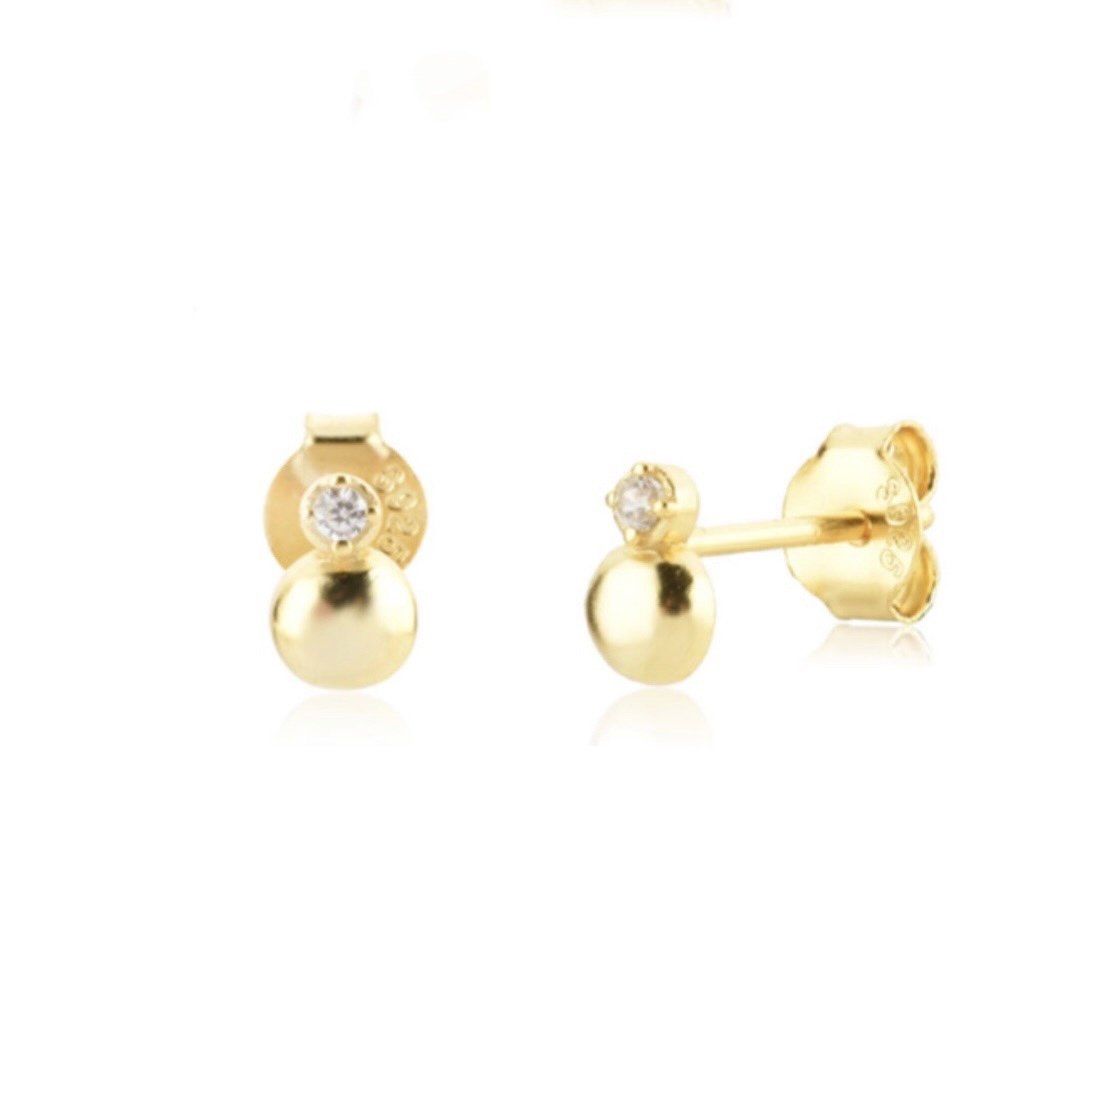 Every day gold earring